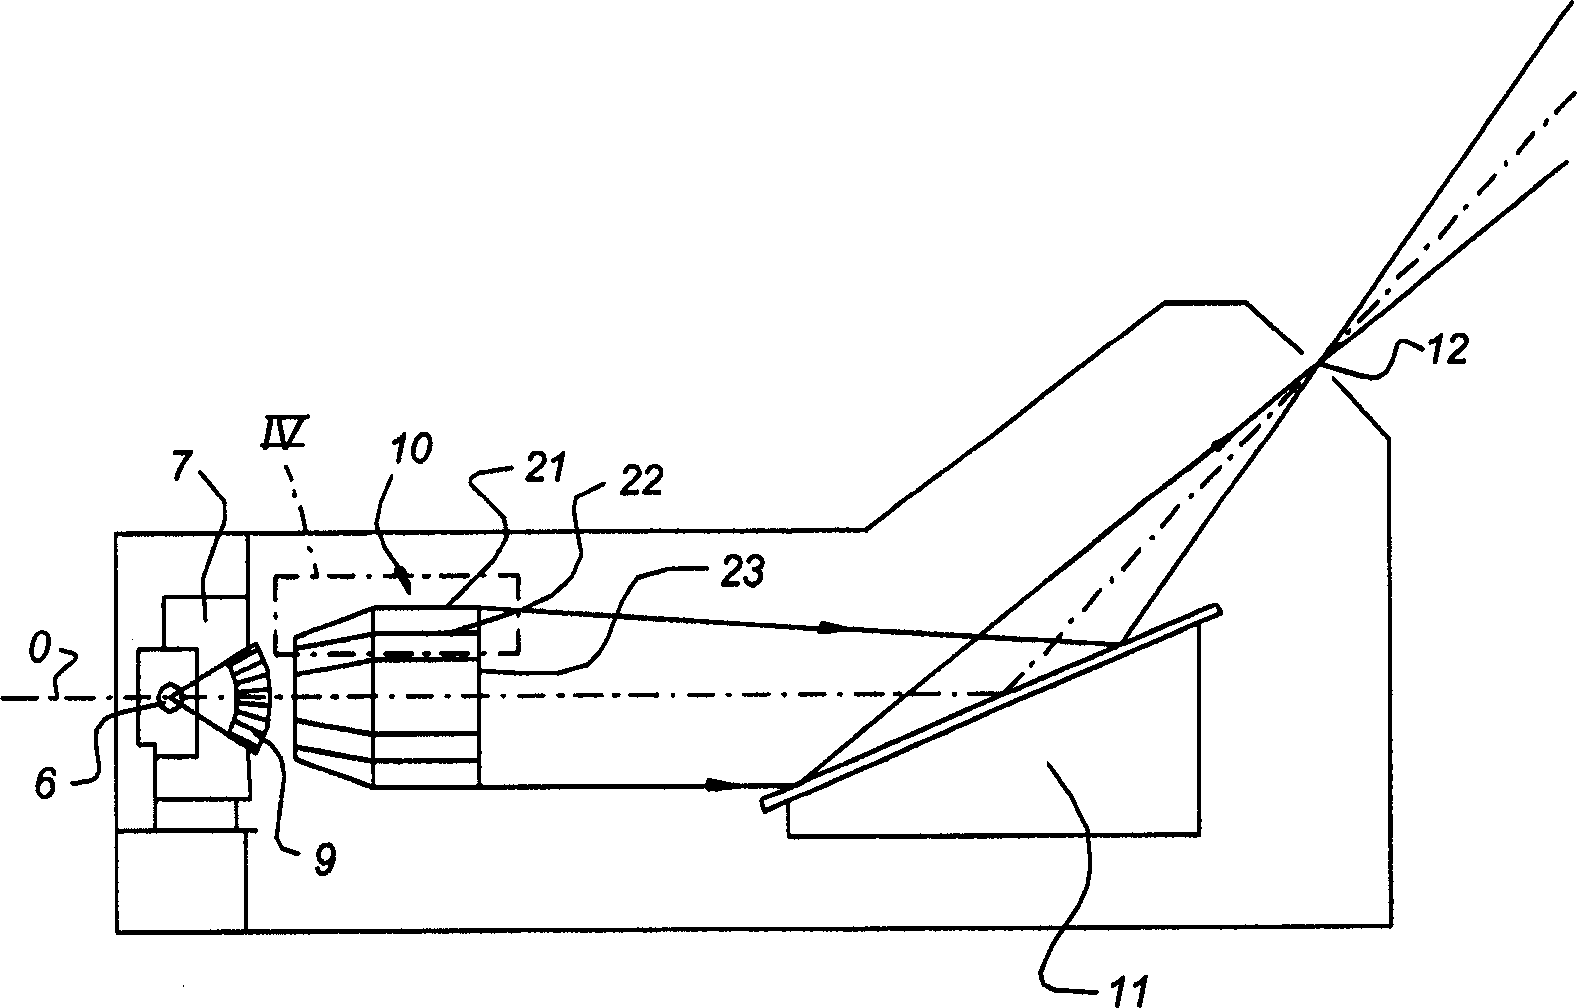 Lithographic printing projector containing secondary electronic clear cell